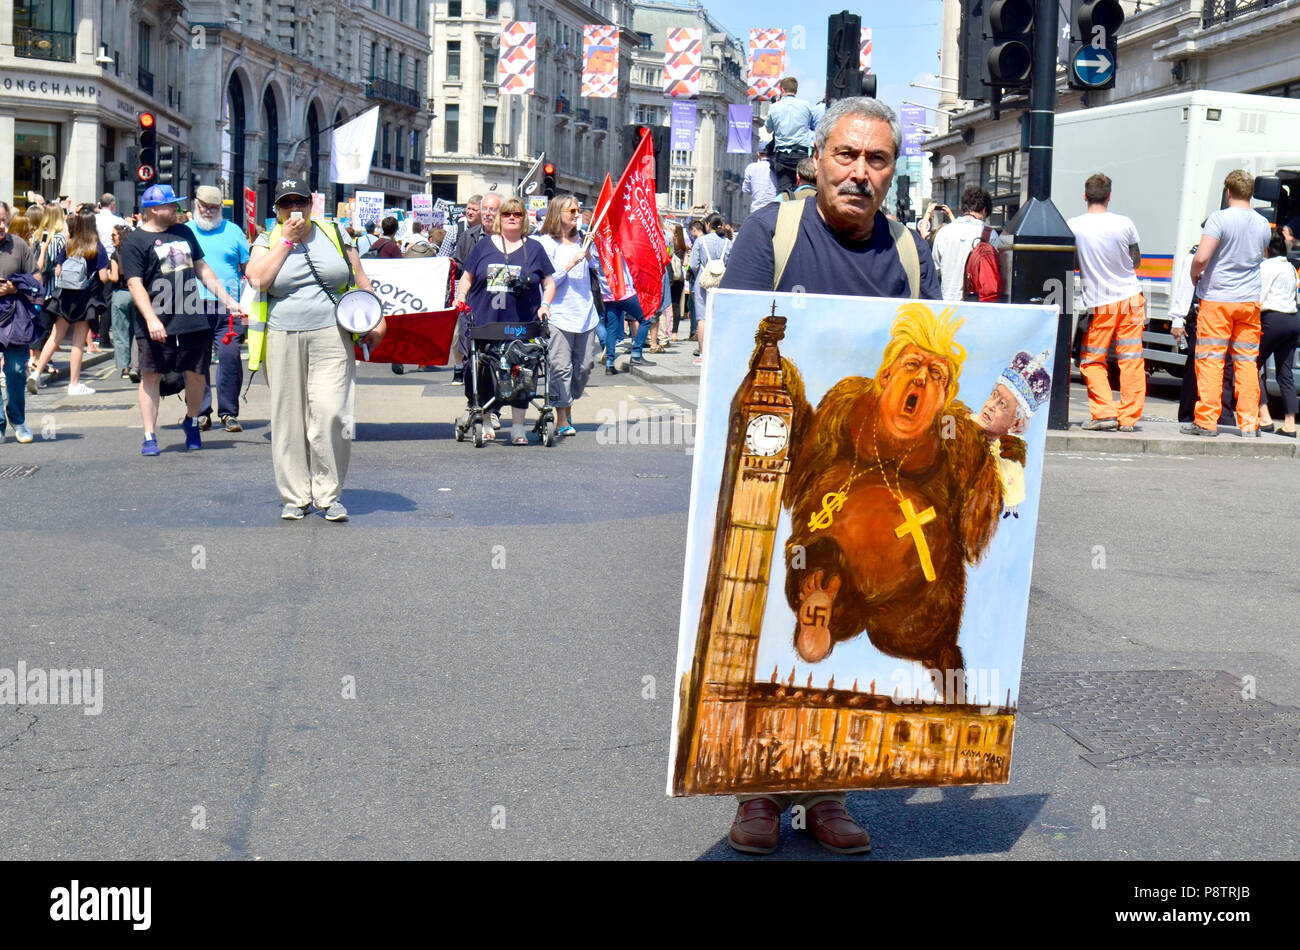 London, 13th July. Thousands march from Portland Place to Parliament Square to protest against President Donald Trump's visit to the UK. Political cartoonist Kaya Mar at the head of the first march with one of his works Credit: PjrFoto/Alamy Live News Stock Photo